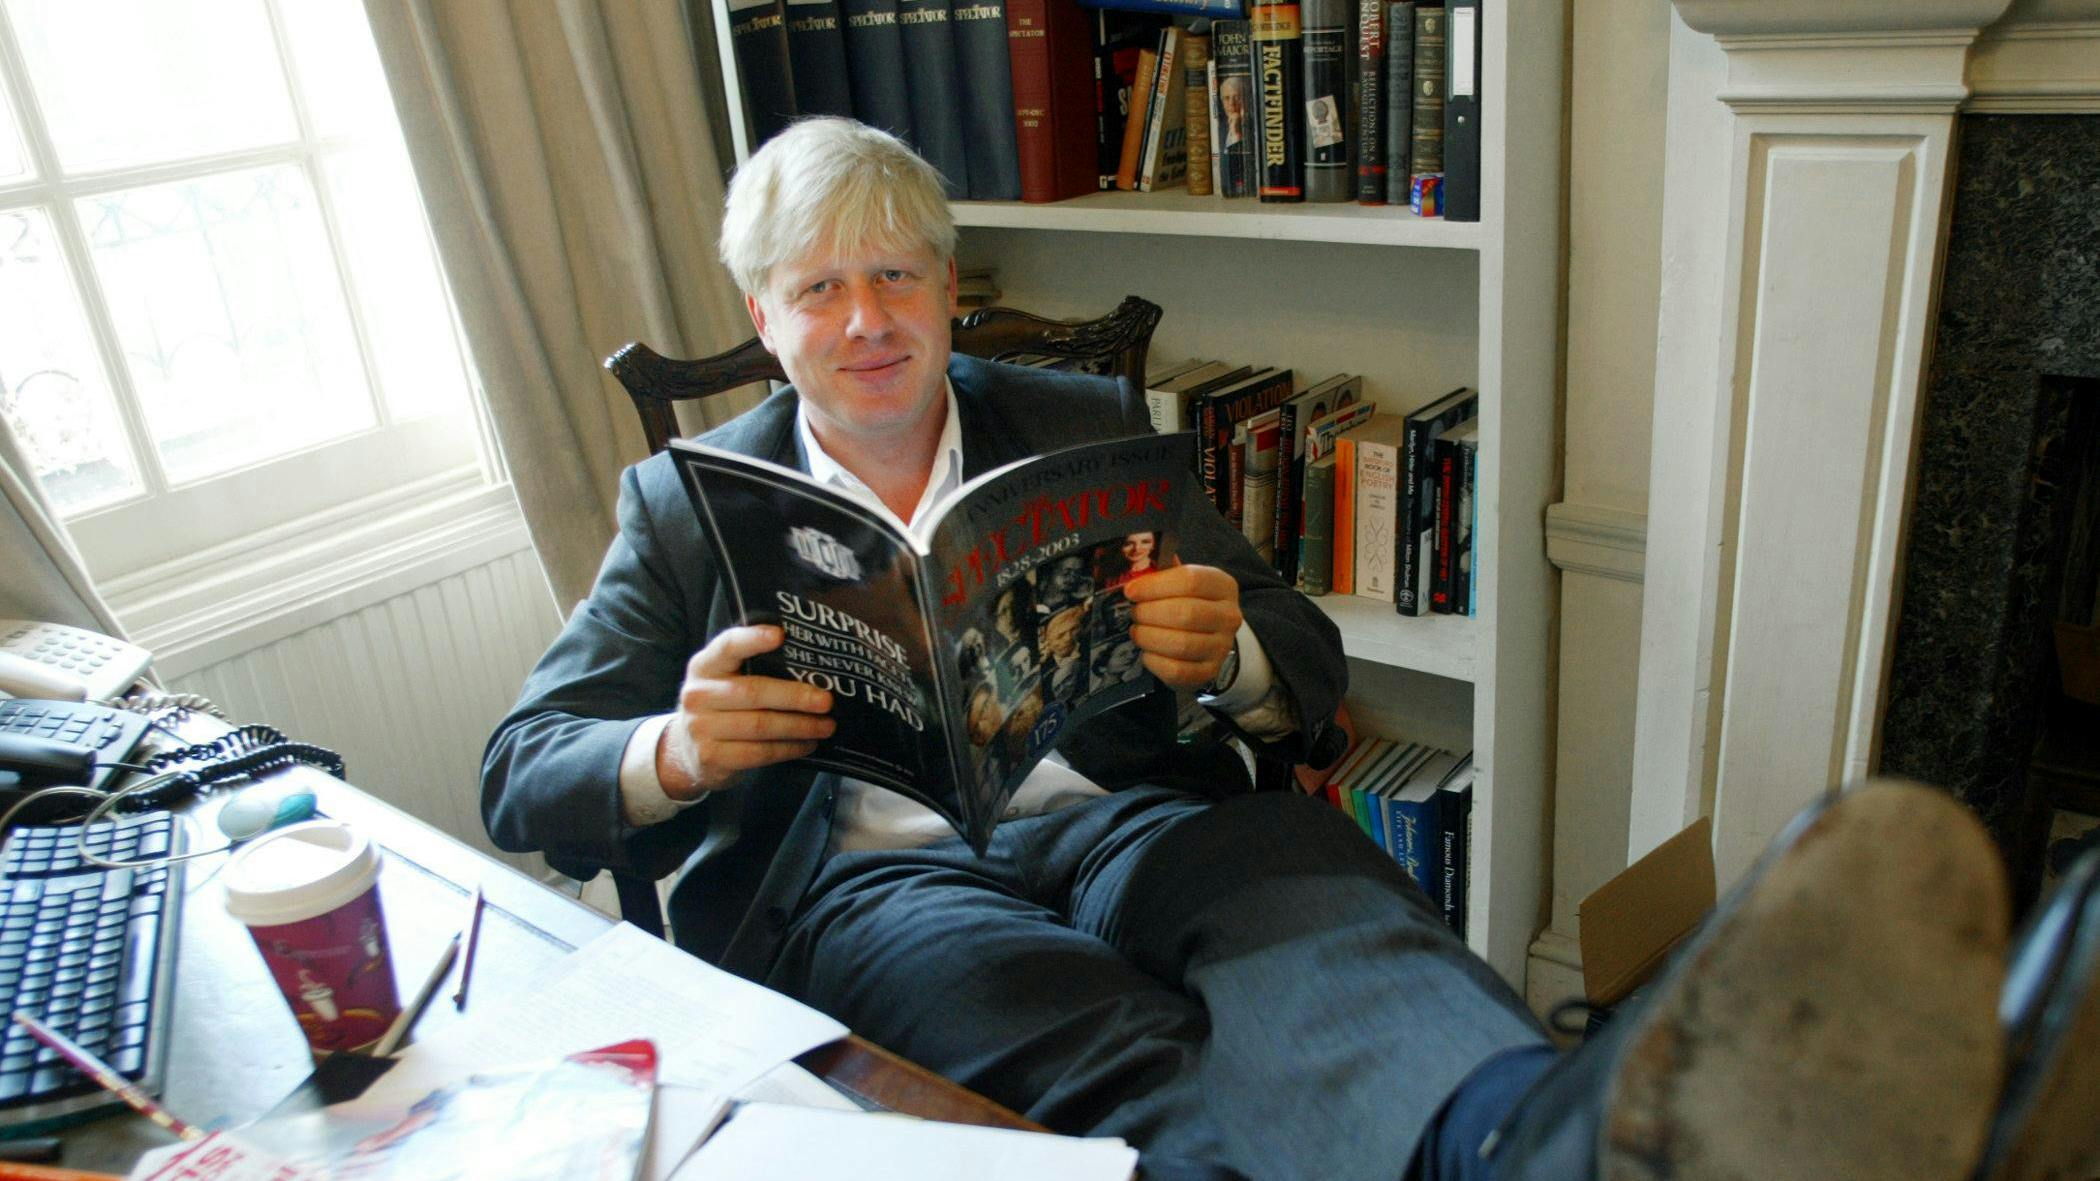 (FILES) In this file photo taken on September 25, 2003 TO GO WITH STORY: LIFESTYLE-BRITAIN-MEDIA. The editor of The Spectator magazine, Boris Johnson, sits in his London office reading the anniversary issue of The Spectator marking 175 years of publication.             AFP PHOTO/Jim WATSON - Since coming to power in July, Boris Johnson has shed his image as a jovial, wisecracking mophead to reveal a ruthless streak that has marked him out since childhood. (Photo by Jim WATSON / AFP)